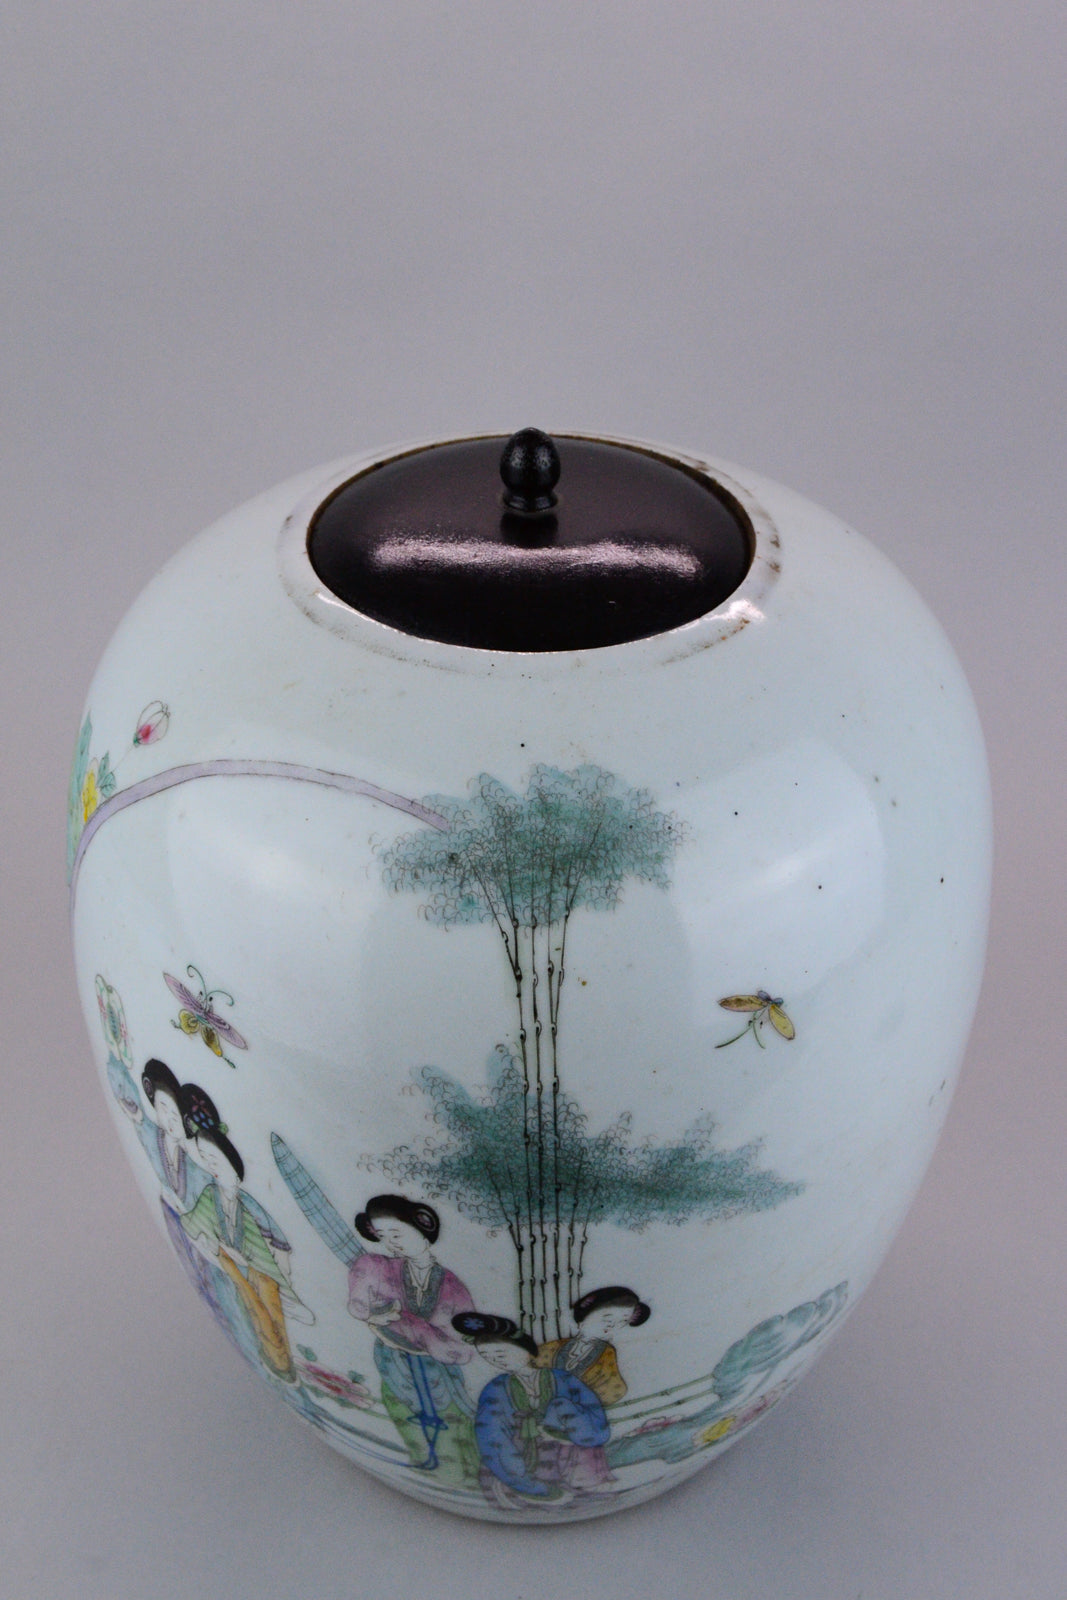 Chinese Ginger Jar Garden Scene with Calligraphy